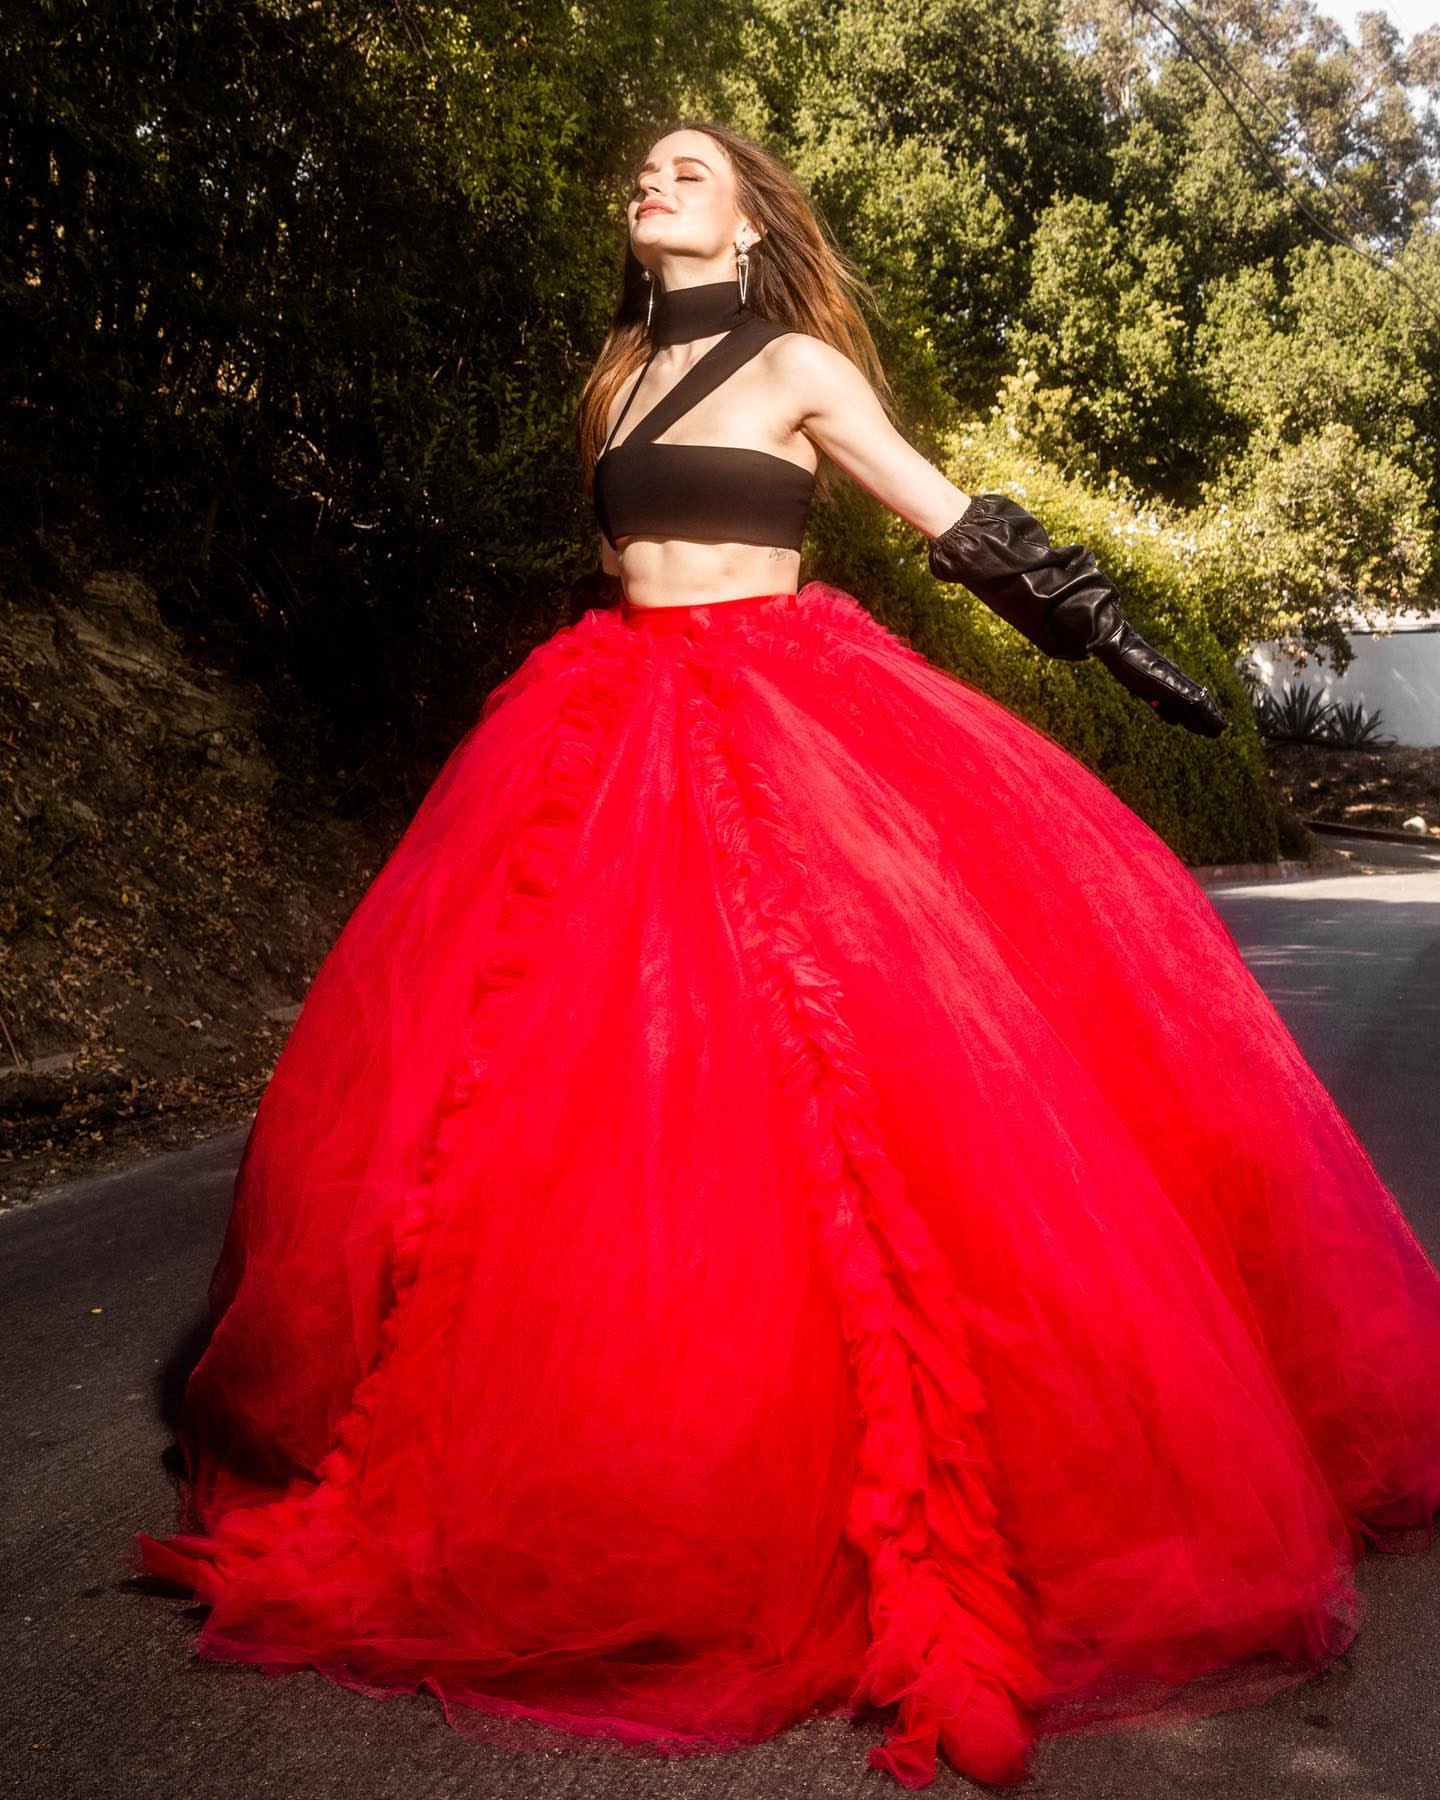 Joey King Poses for The Premiere of The Princess!